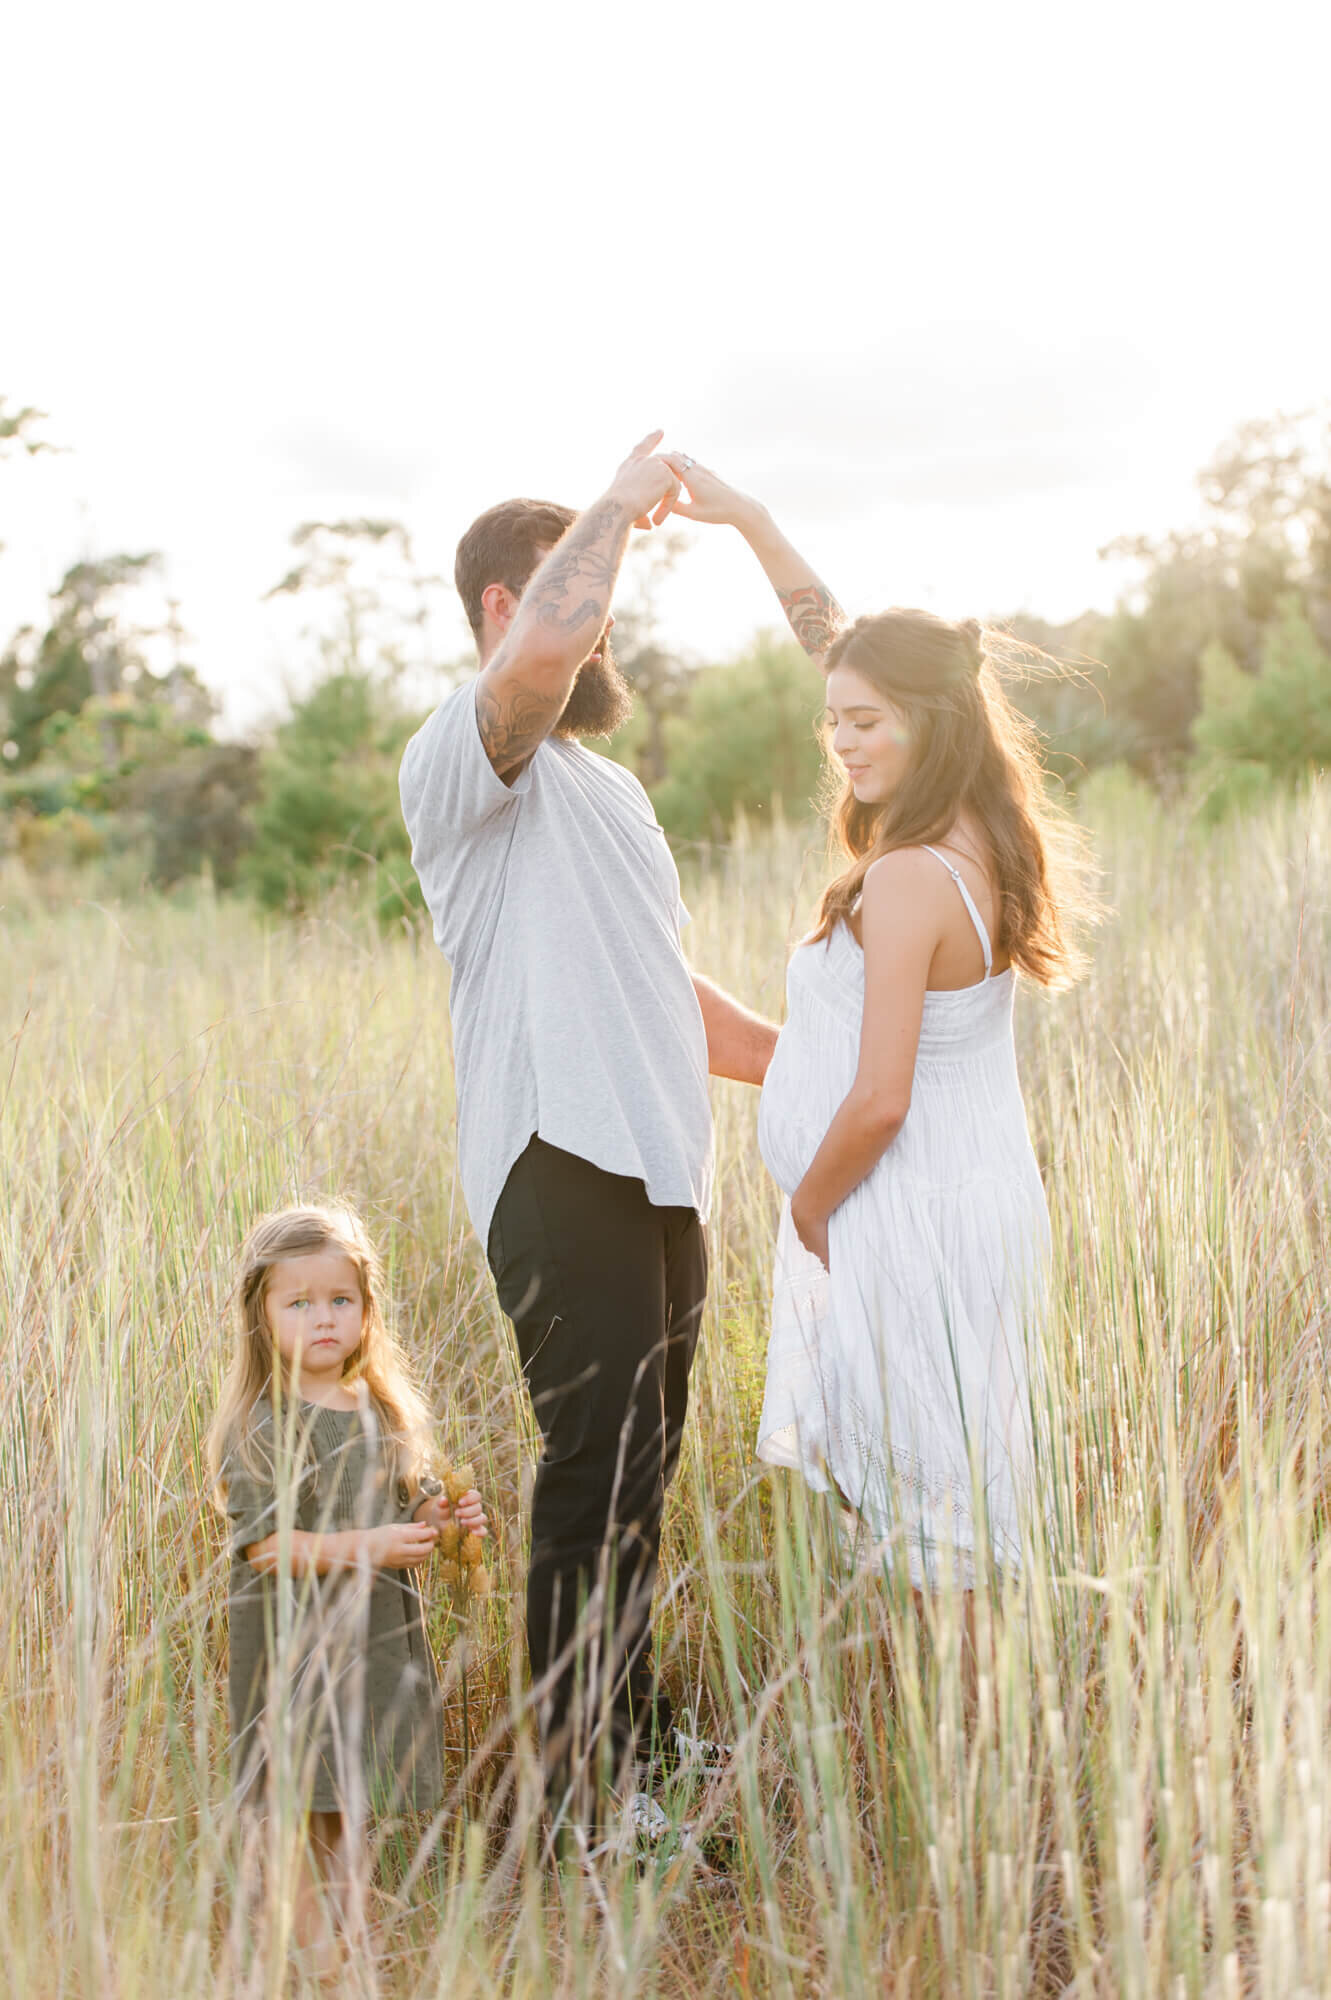 Dad gives mom a twirl while their family of three is standing in a  tall grass field